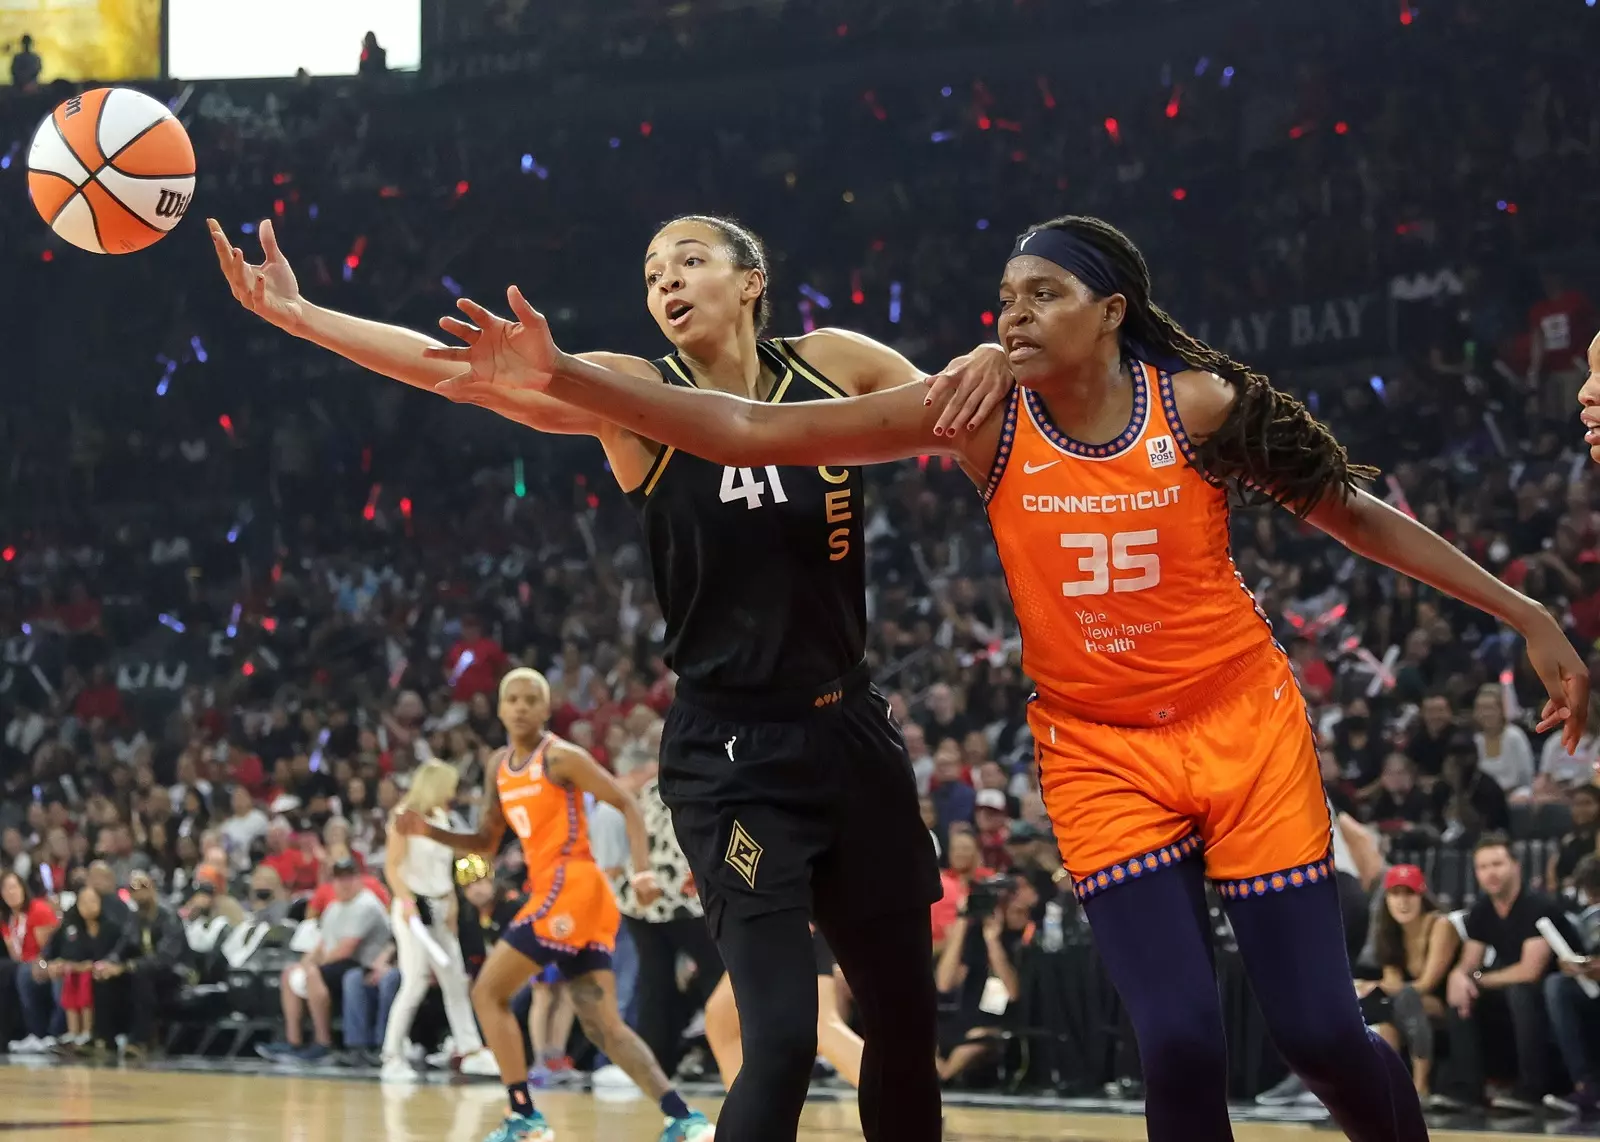 WNBA: Mystics will be on national TV 18 times this season - Bullets Forever